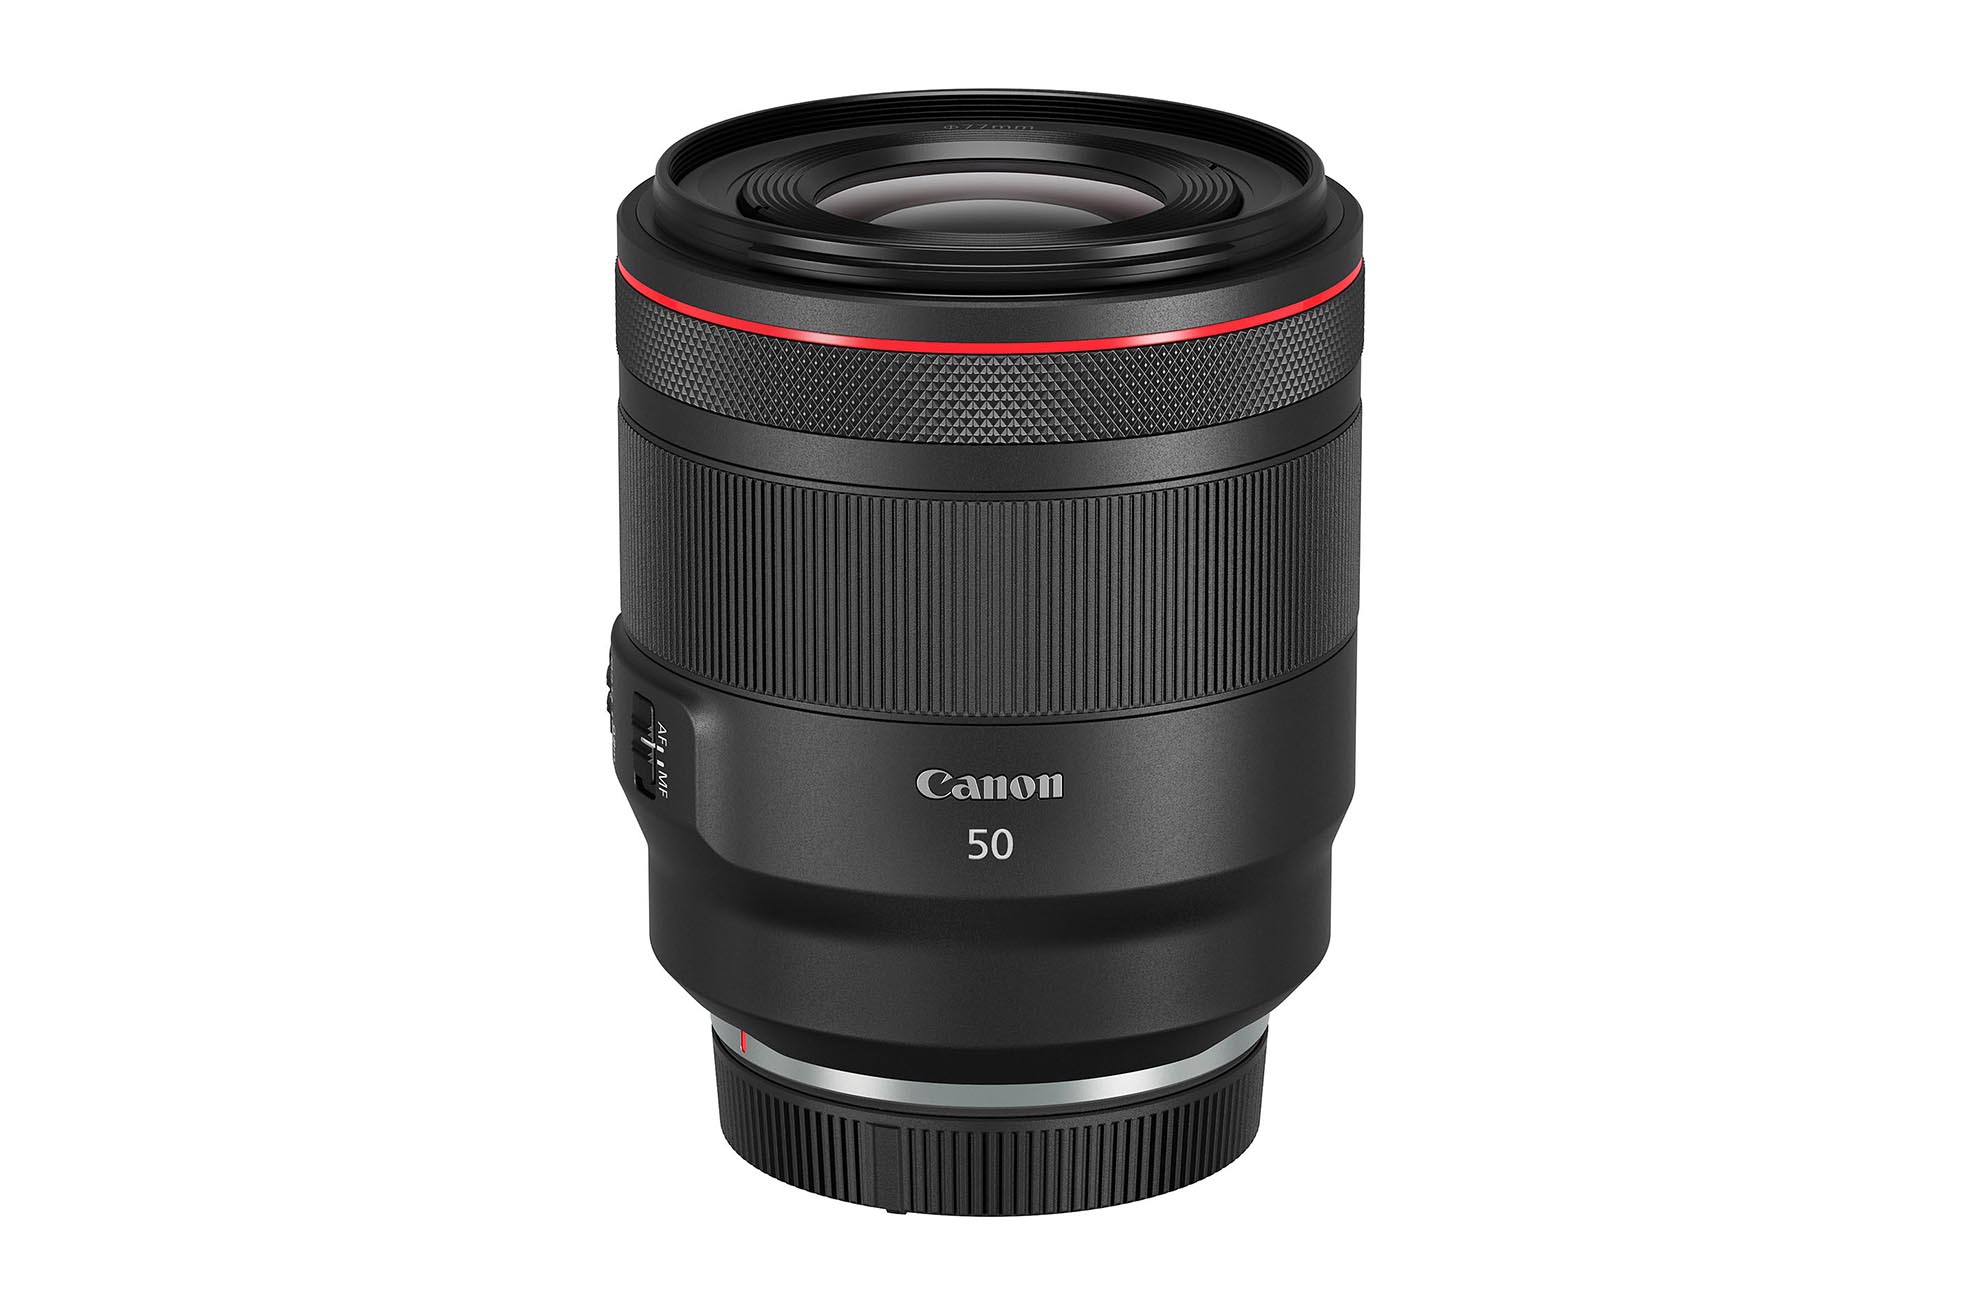 Canon 50mm lens product image